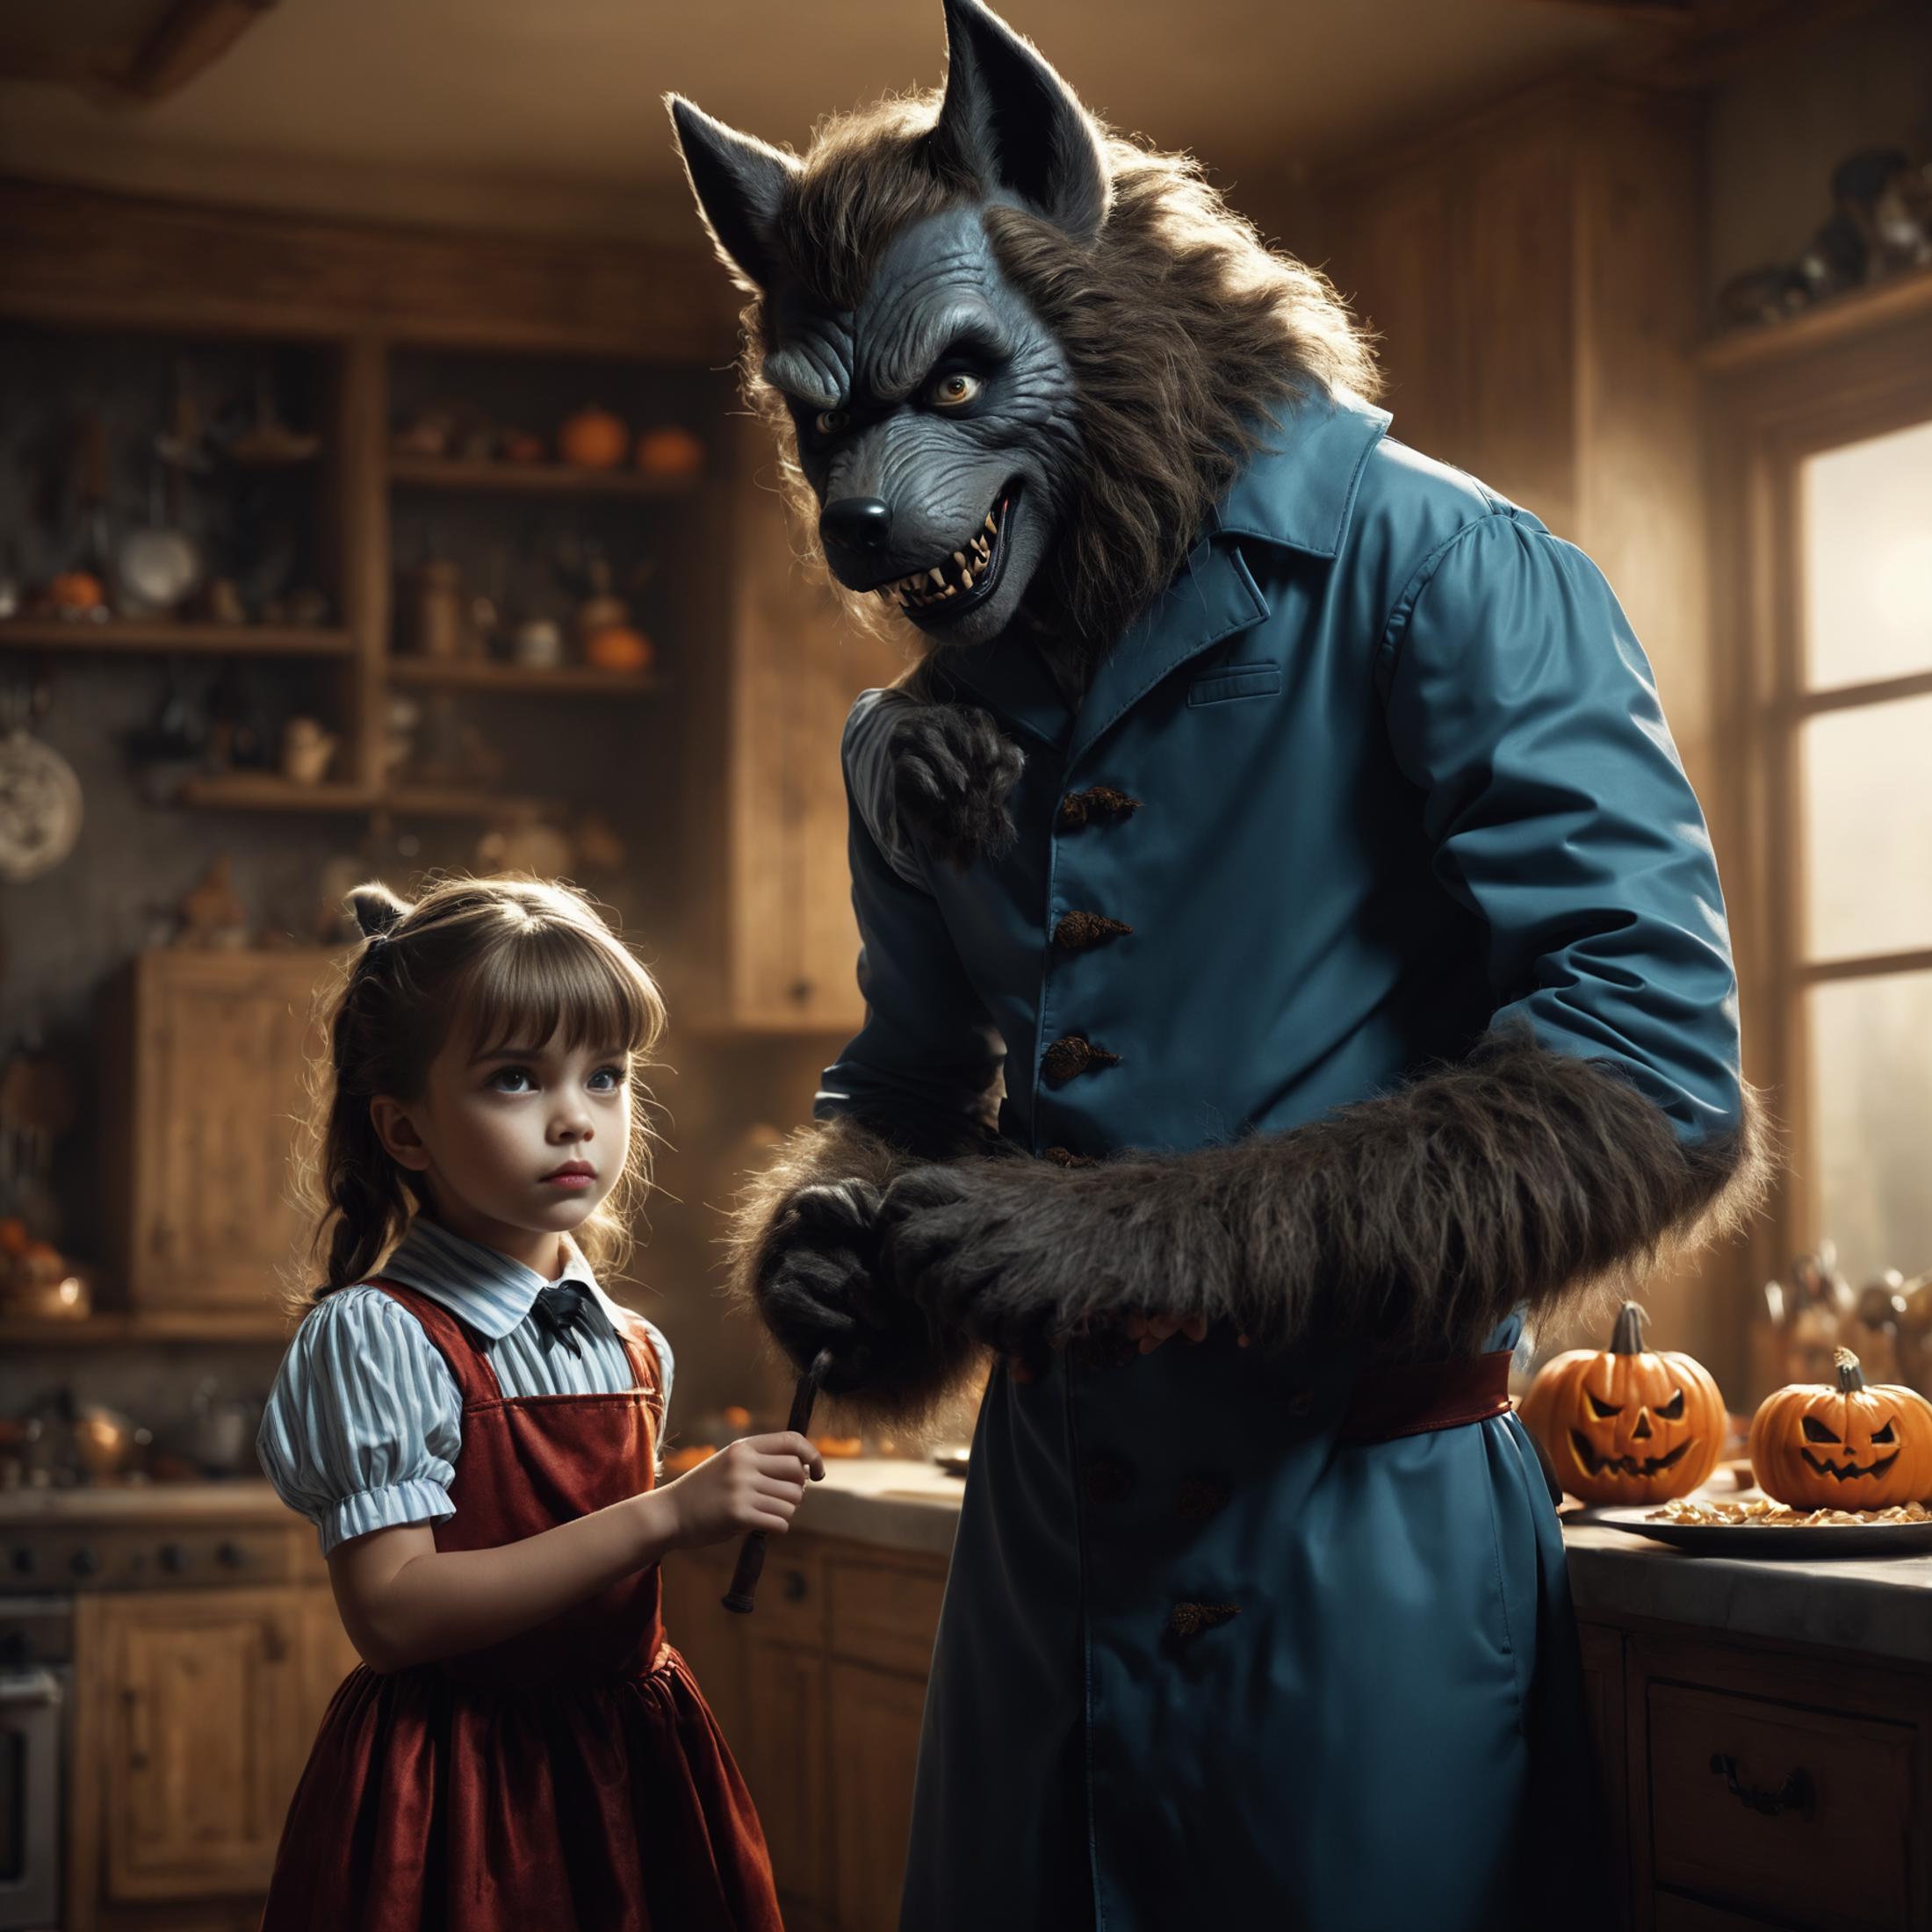 A blue coat werewolf is holding a child with a knife and surrounded by pumpkins.